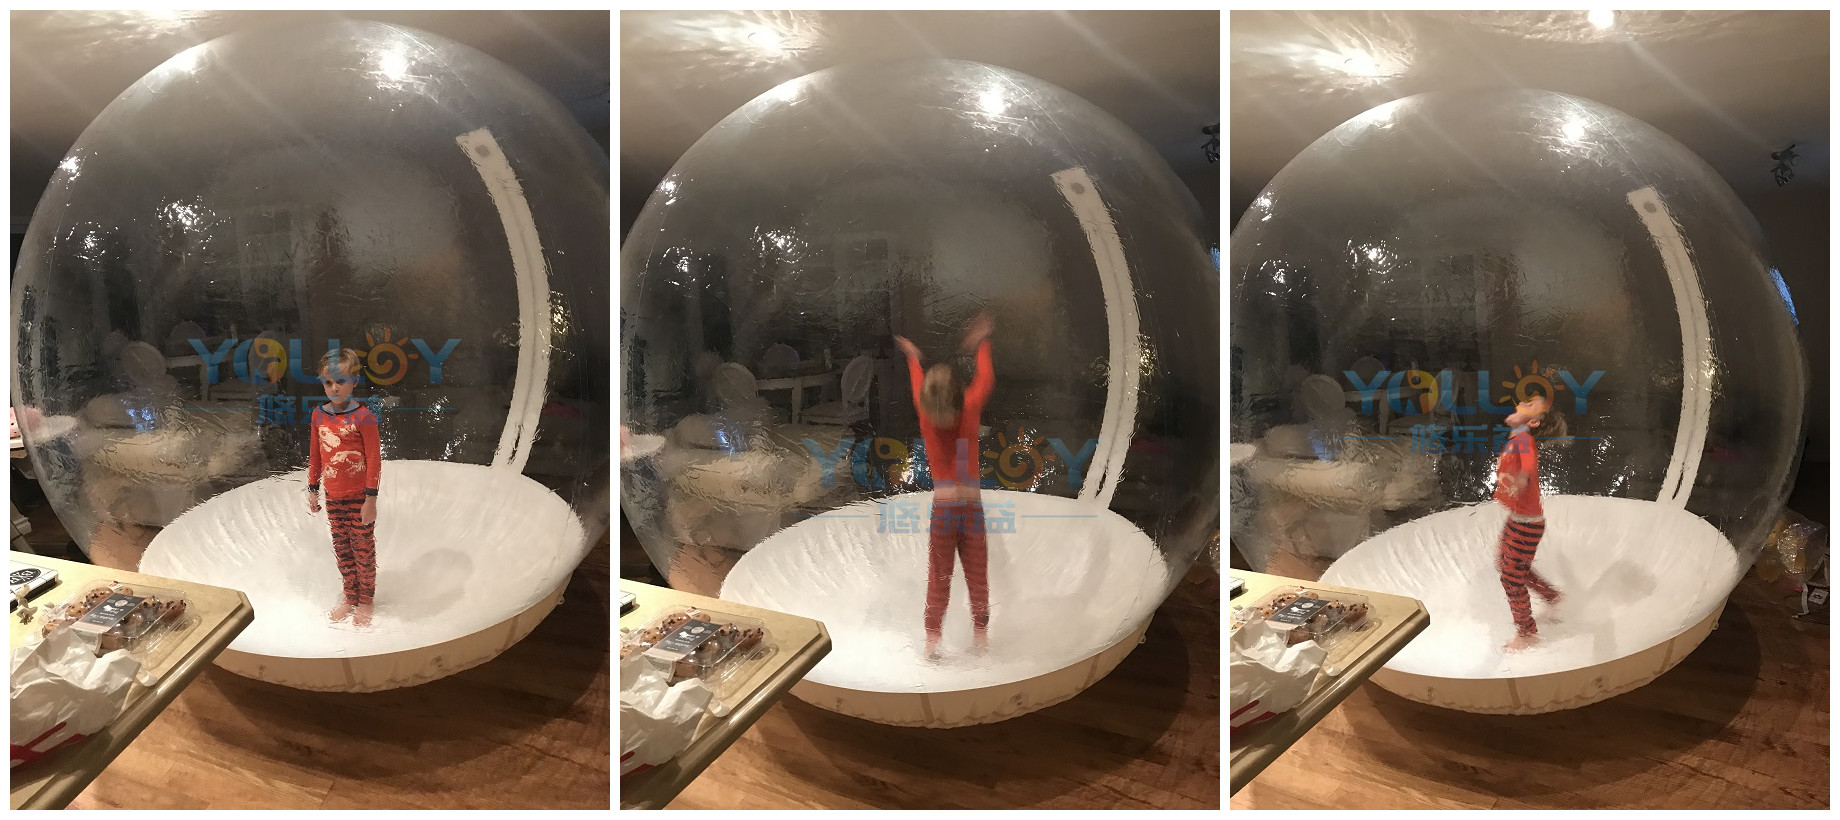 Inflatable snow globe for show time